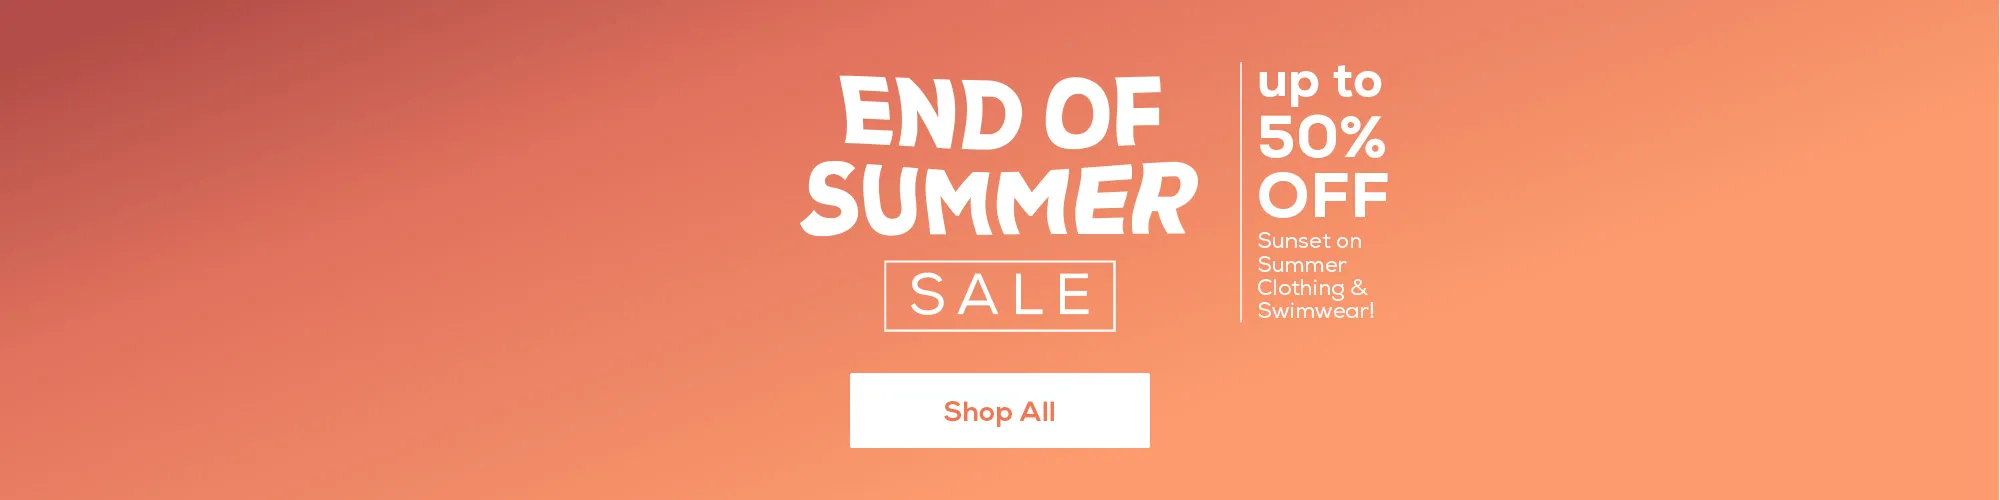 End of Summer Sale - up to 50% OFF